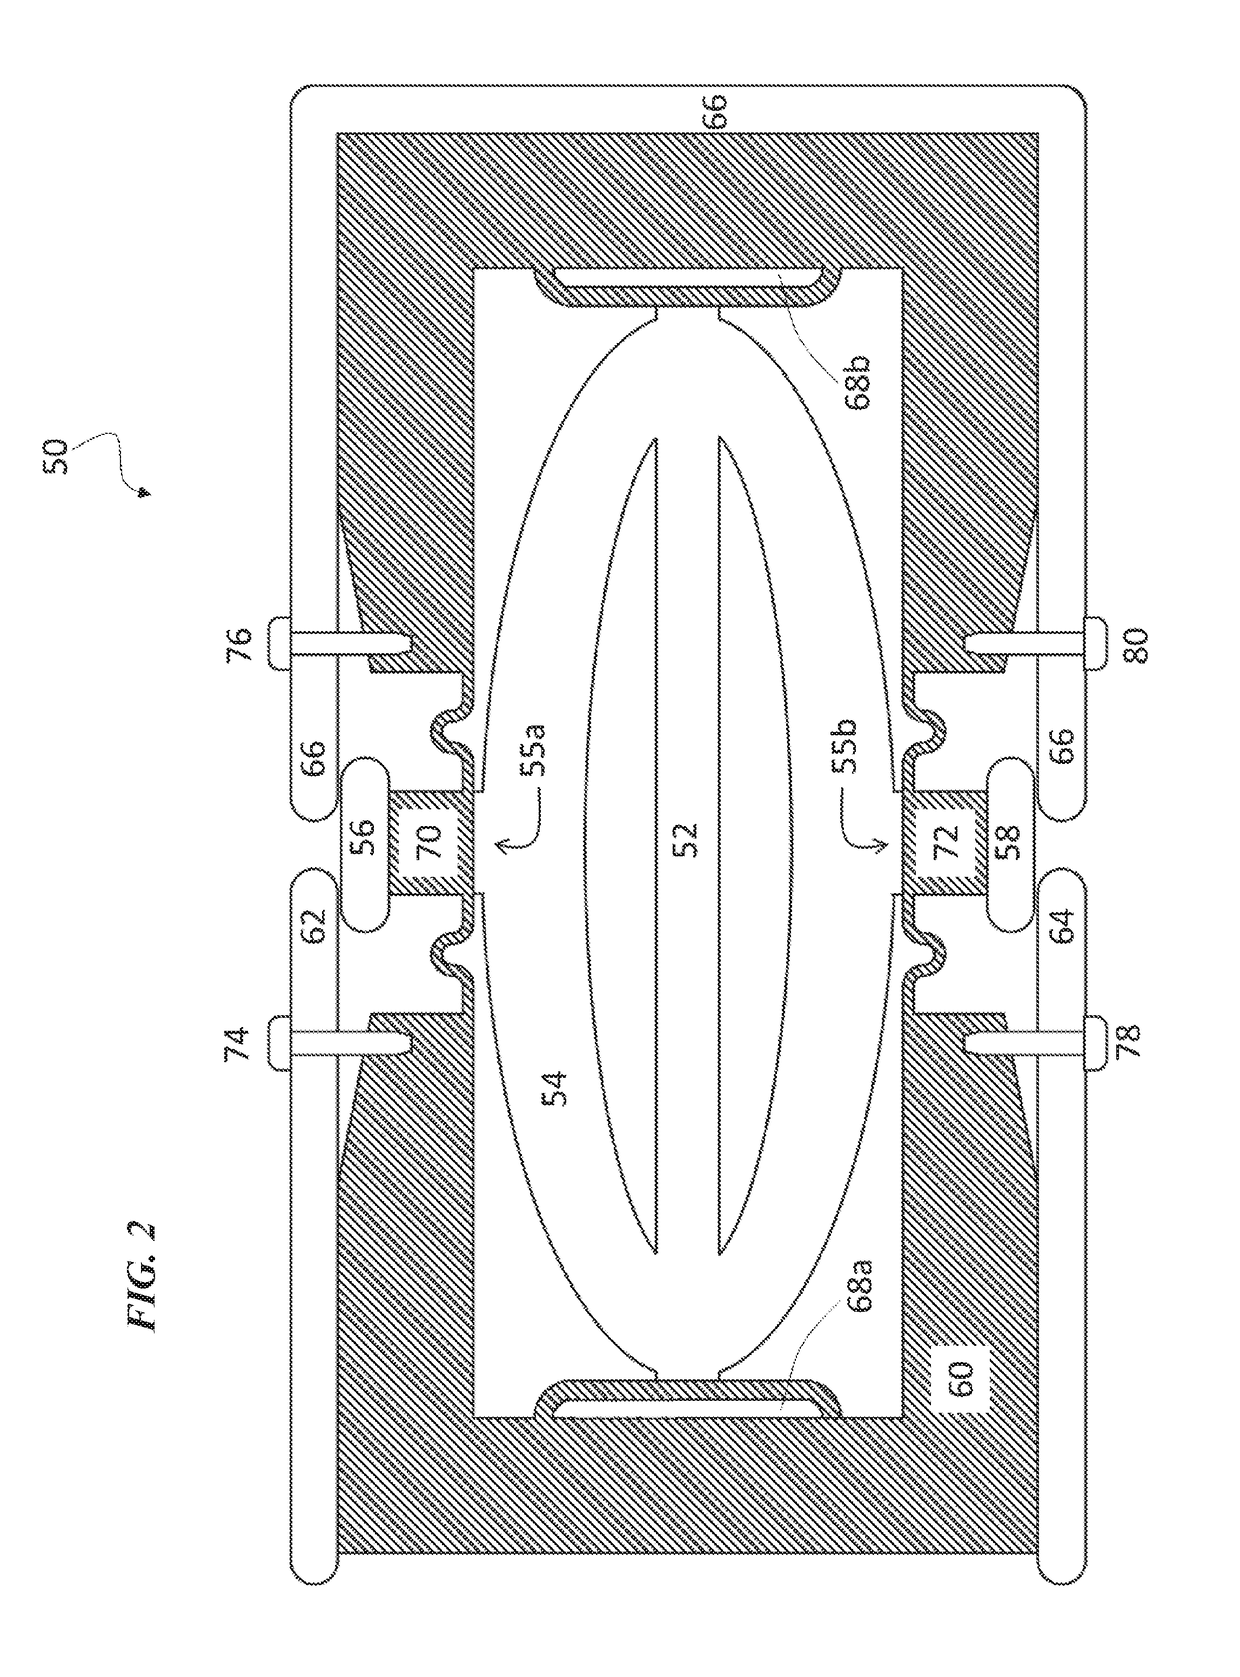 Ultrafast electromechanical disconnect switch having contact pressure adjustment and switching chamber